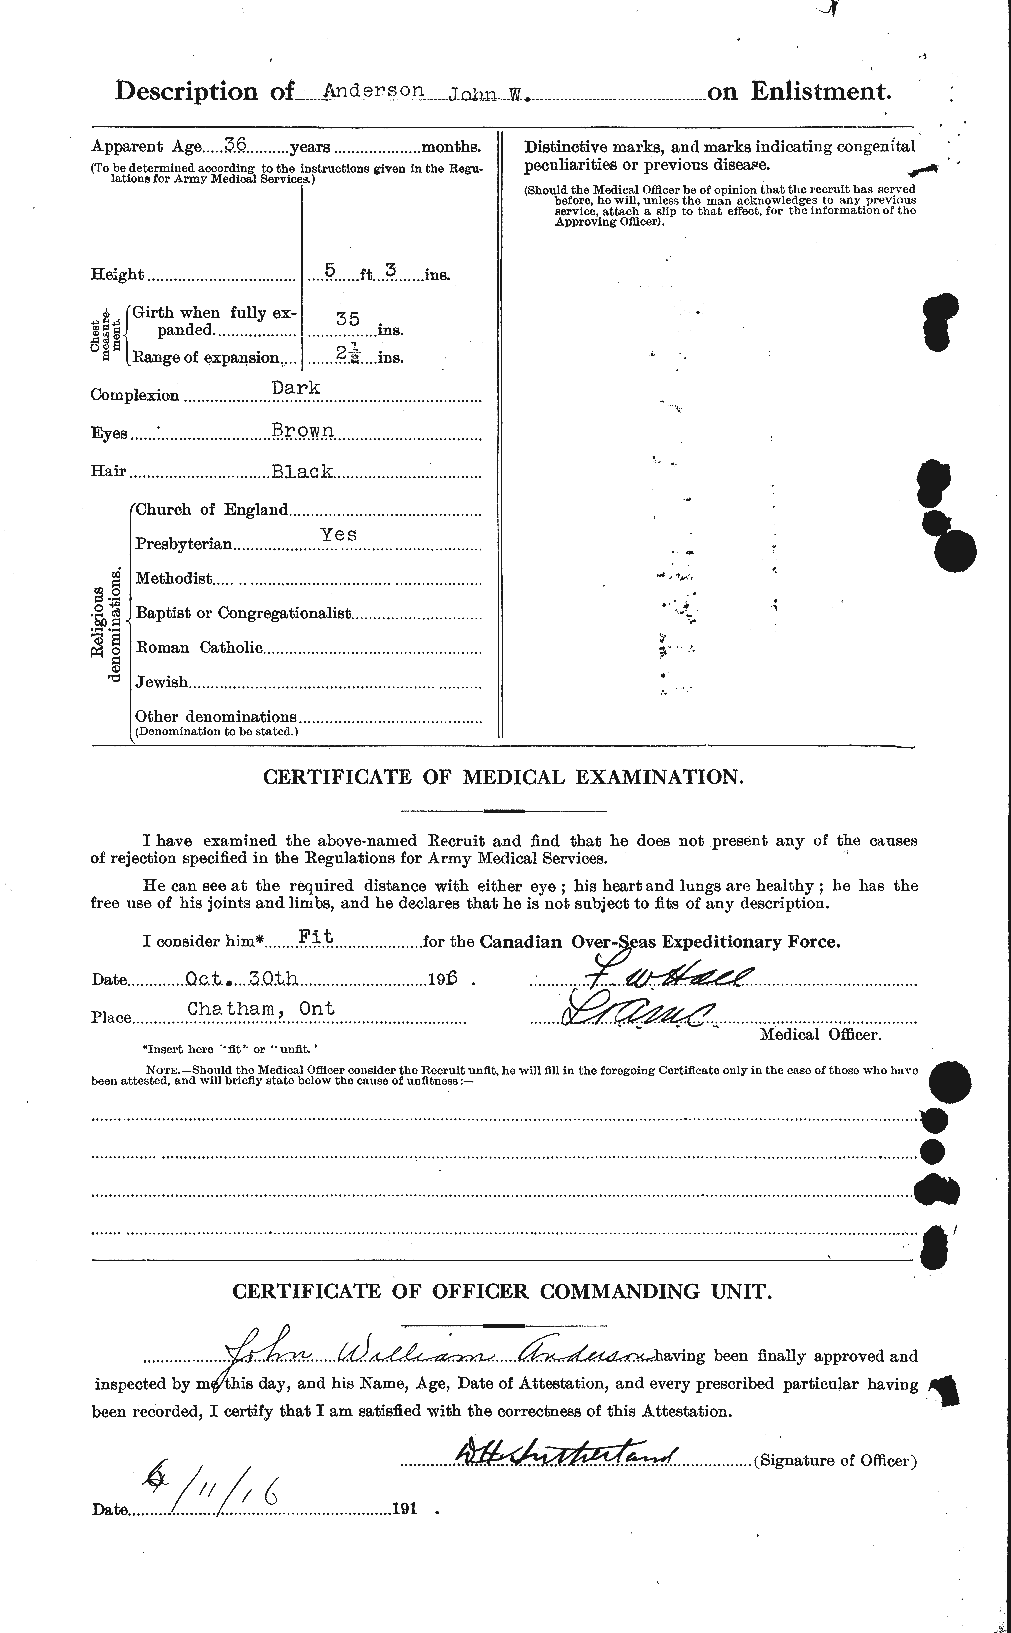 Personnel Records of the First World War - CEF 207594b